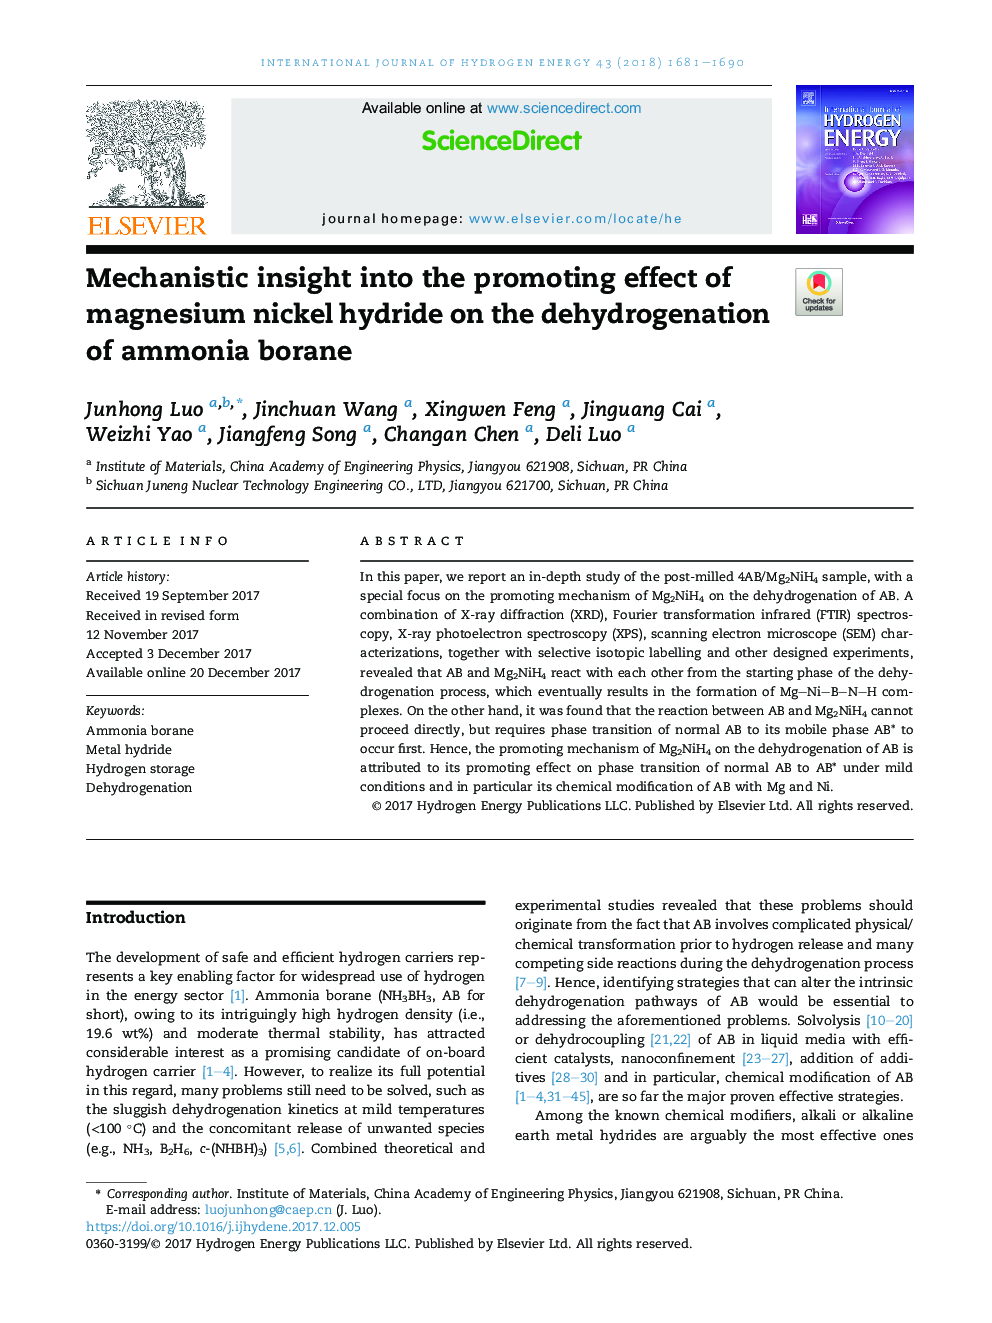 Mechanistic insight into the promoting effect of magnesium nickel hydride on the dehydrogenation of ammonia borane